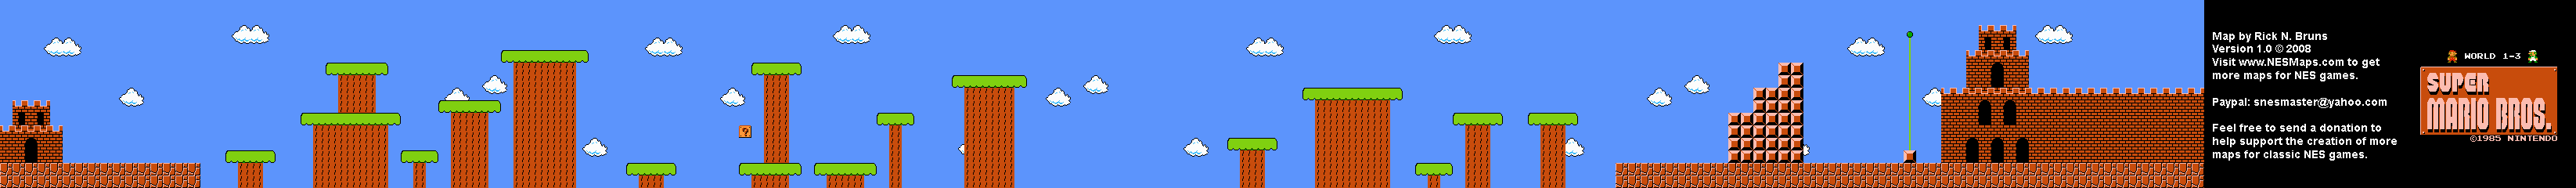 Super Mario Brothers - World 1-3 Nintendo NES Background Only Map